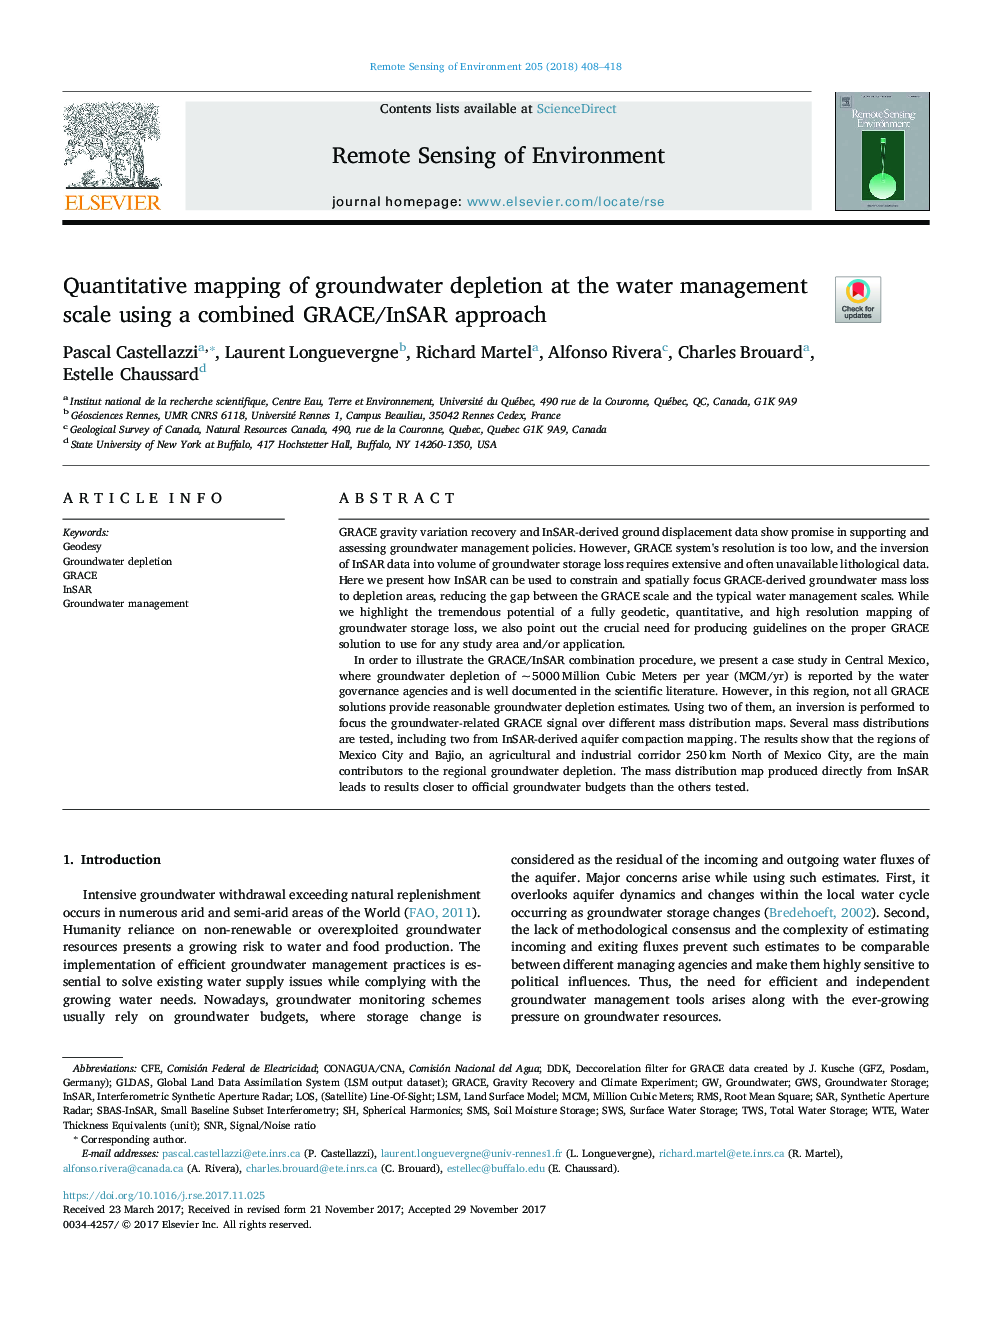 Quantitative mapping of groundwater depletion at the water management scale using a combined GRACE/InSAR approach